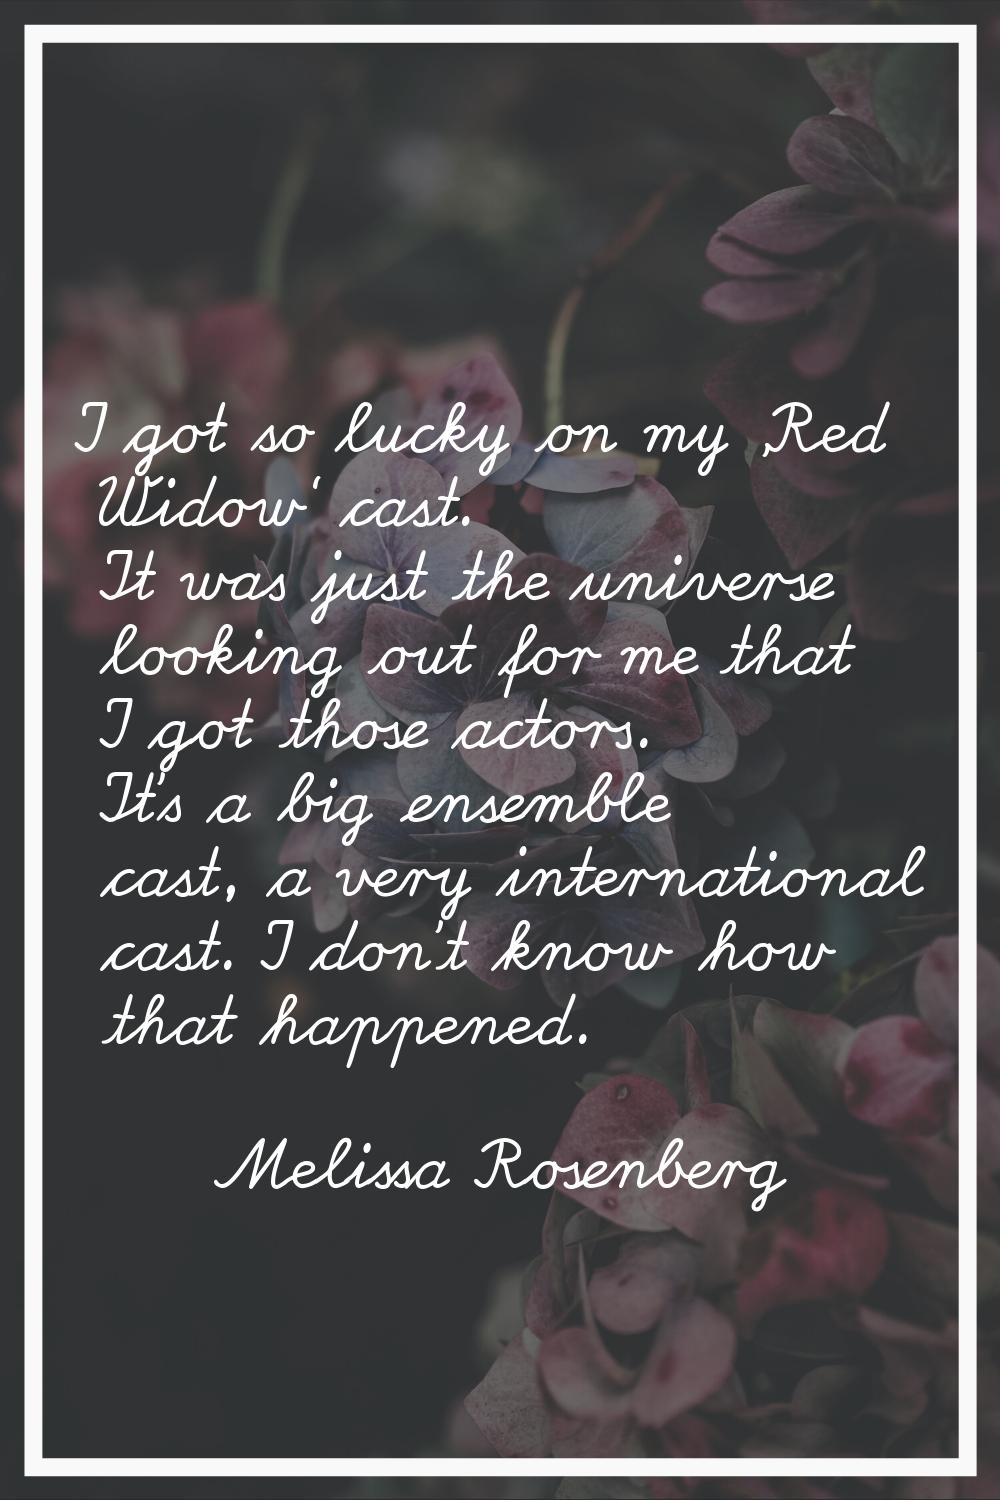 I got so lucky on my 'Red Widow' cast. It was just the universe looking out for me that I got those